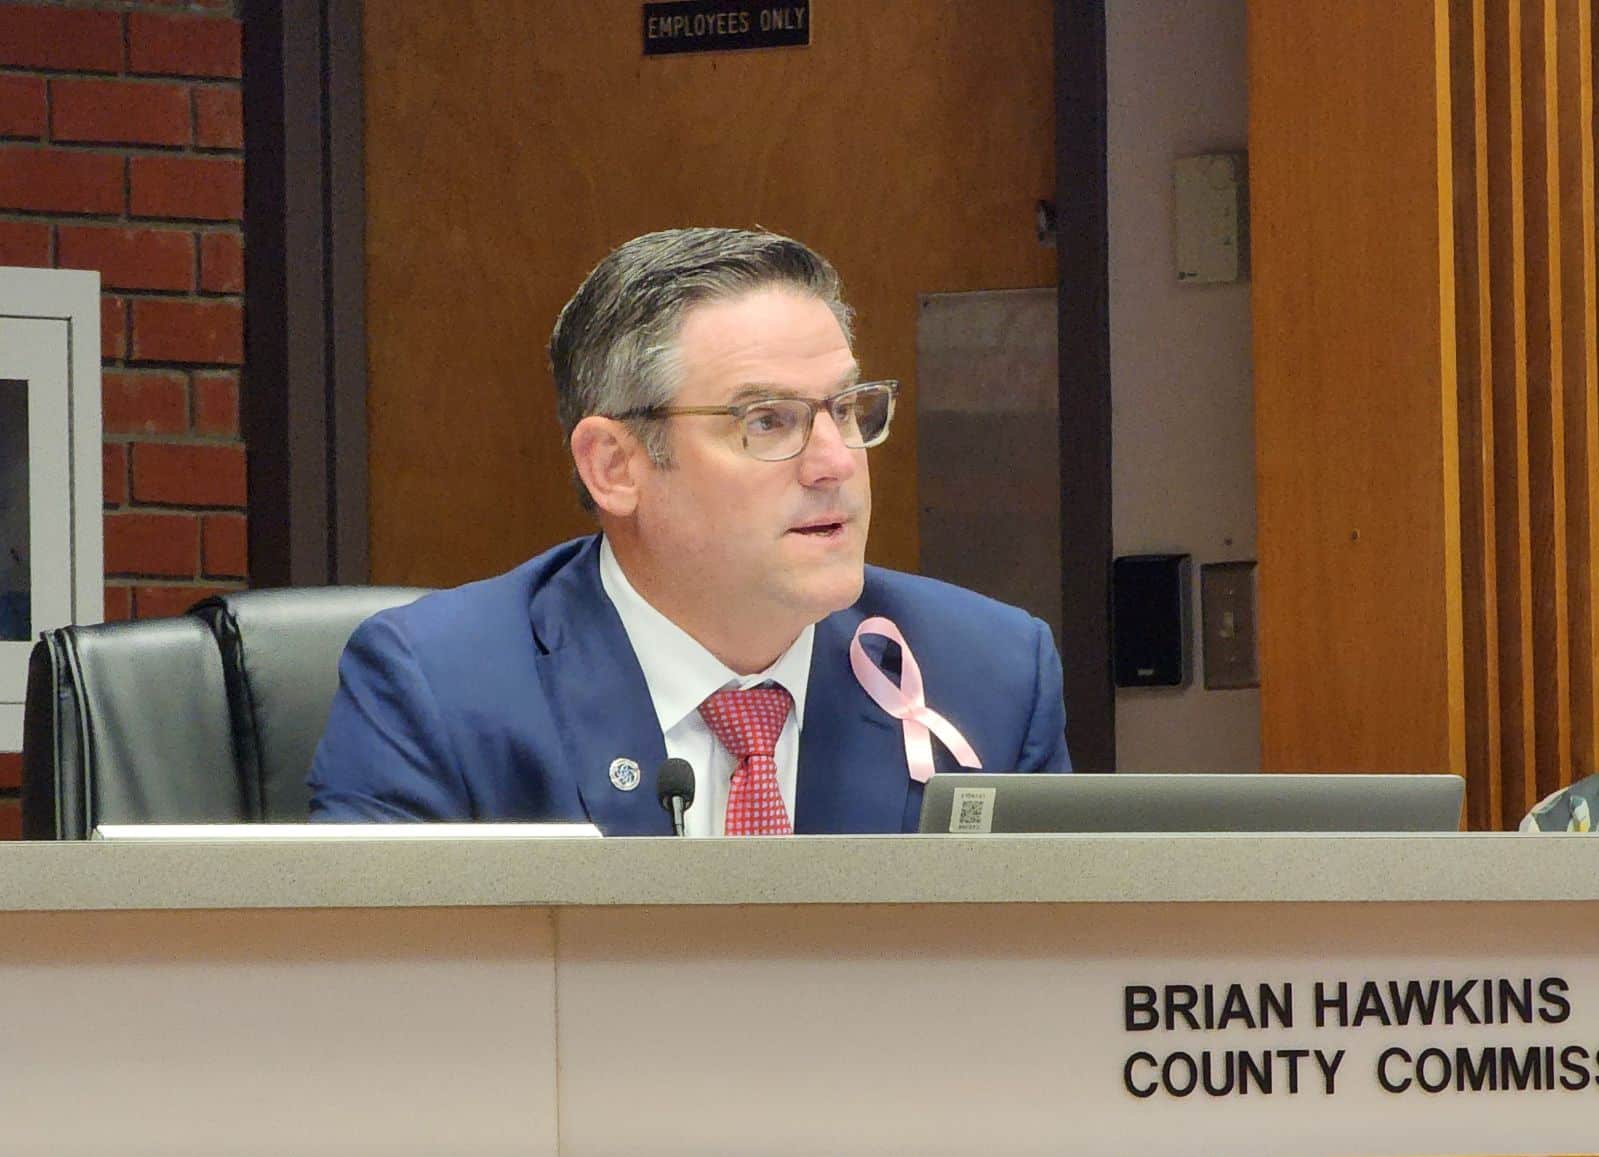 Commissioner Brian Hawkins called Armstrong's actions "Amazing" during the April 9 BOCC meeting. [Credit: A. Szempruch]